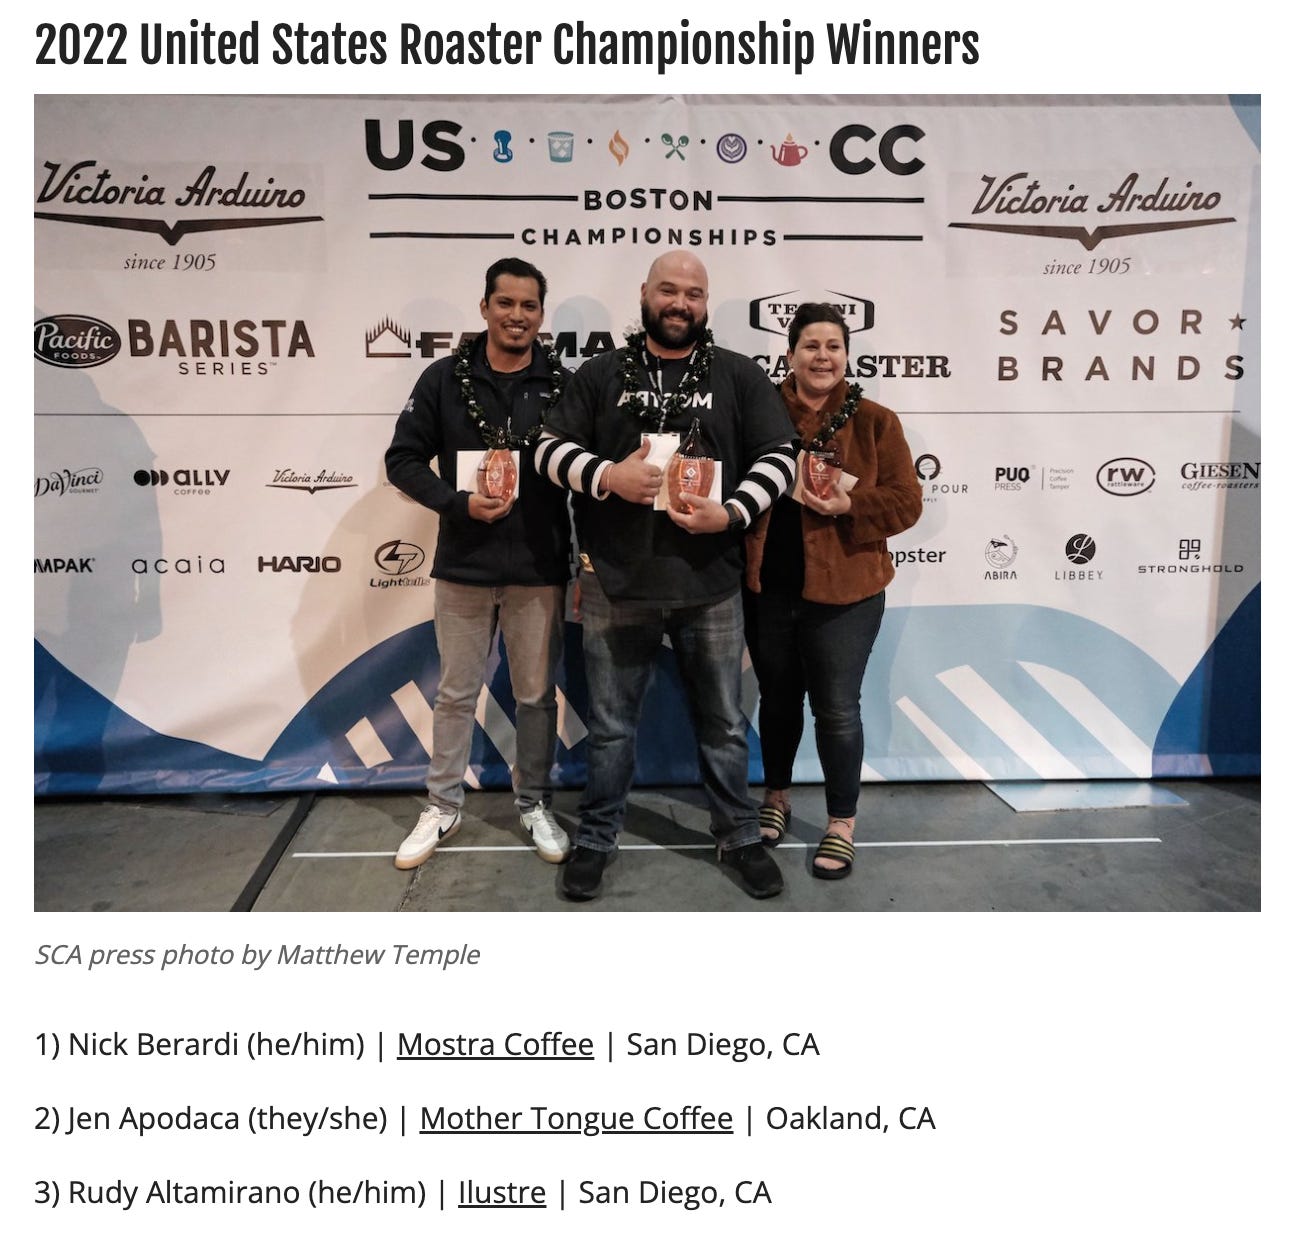 The three winners stand in front of a promotional banner for the SCA Roaster Championships holding trophies.